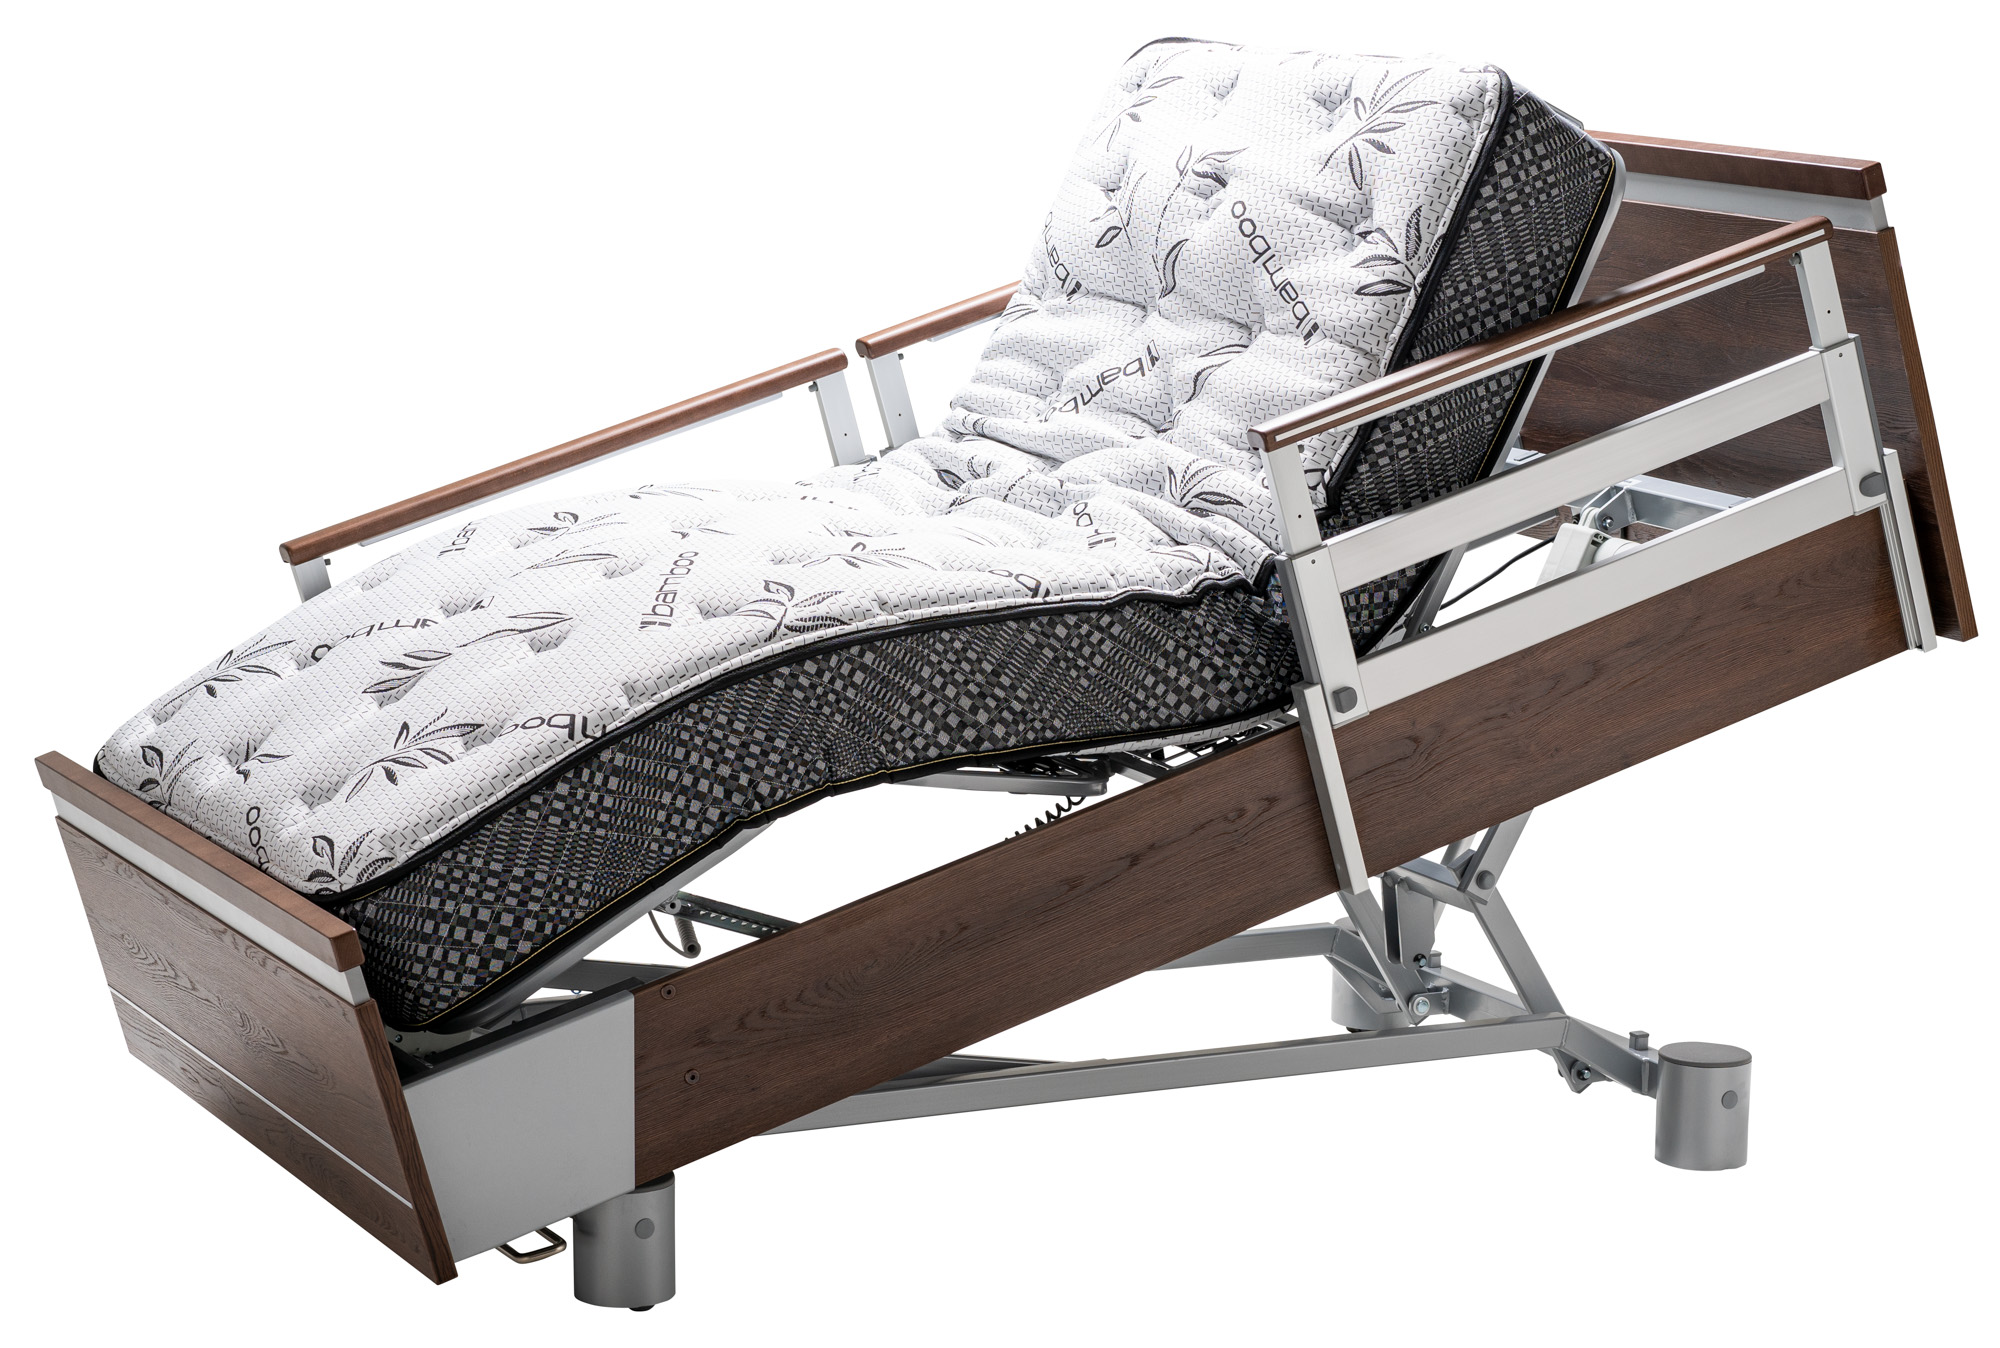 Sondercare Hospital Bed Elevated Position